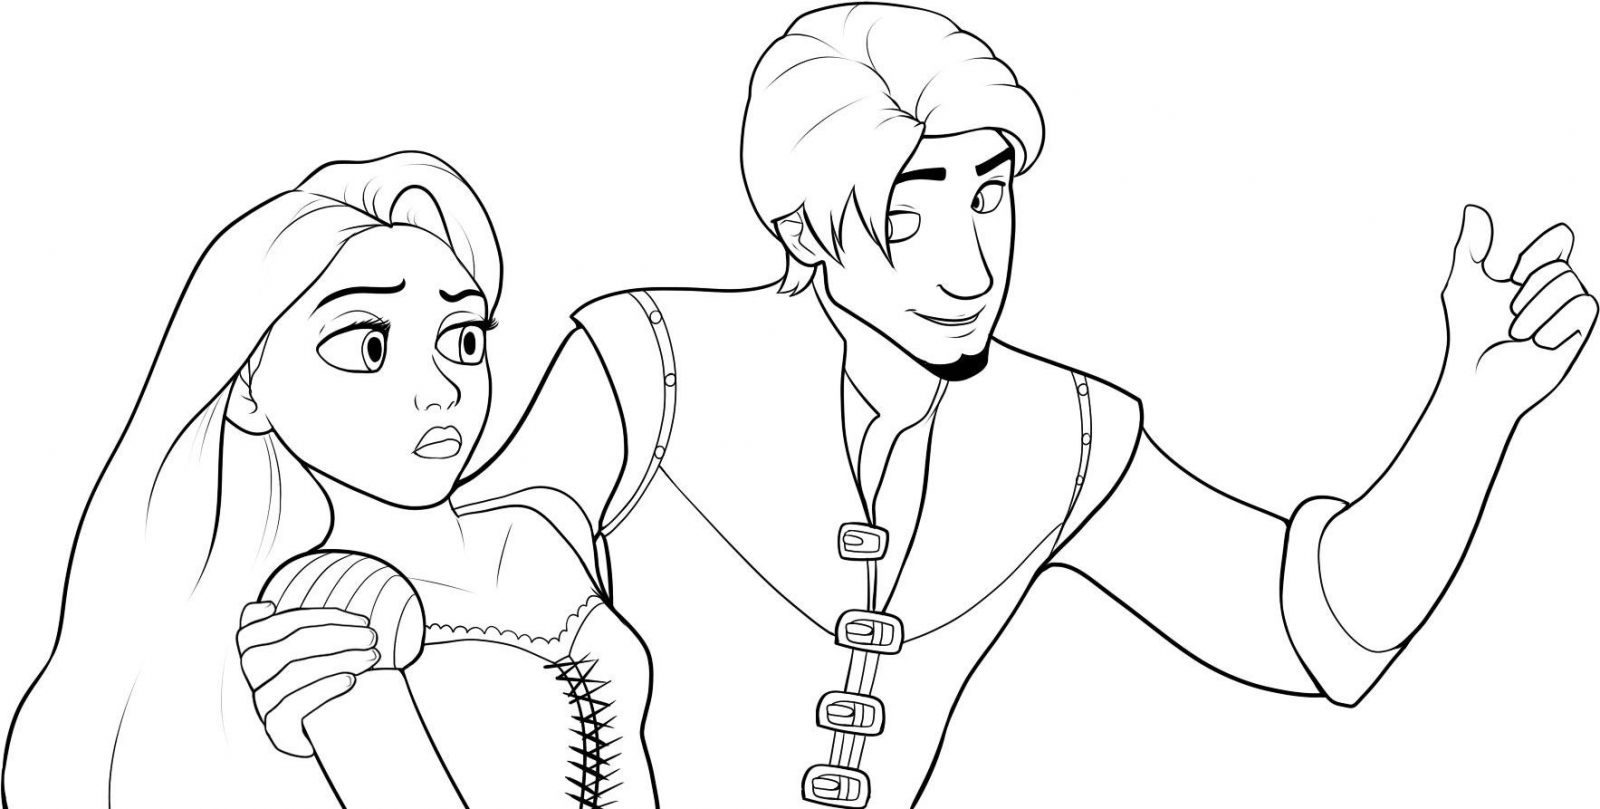 Flynn And Rapunzel coloring page